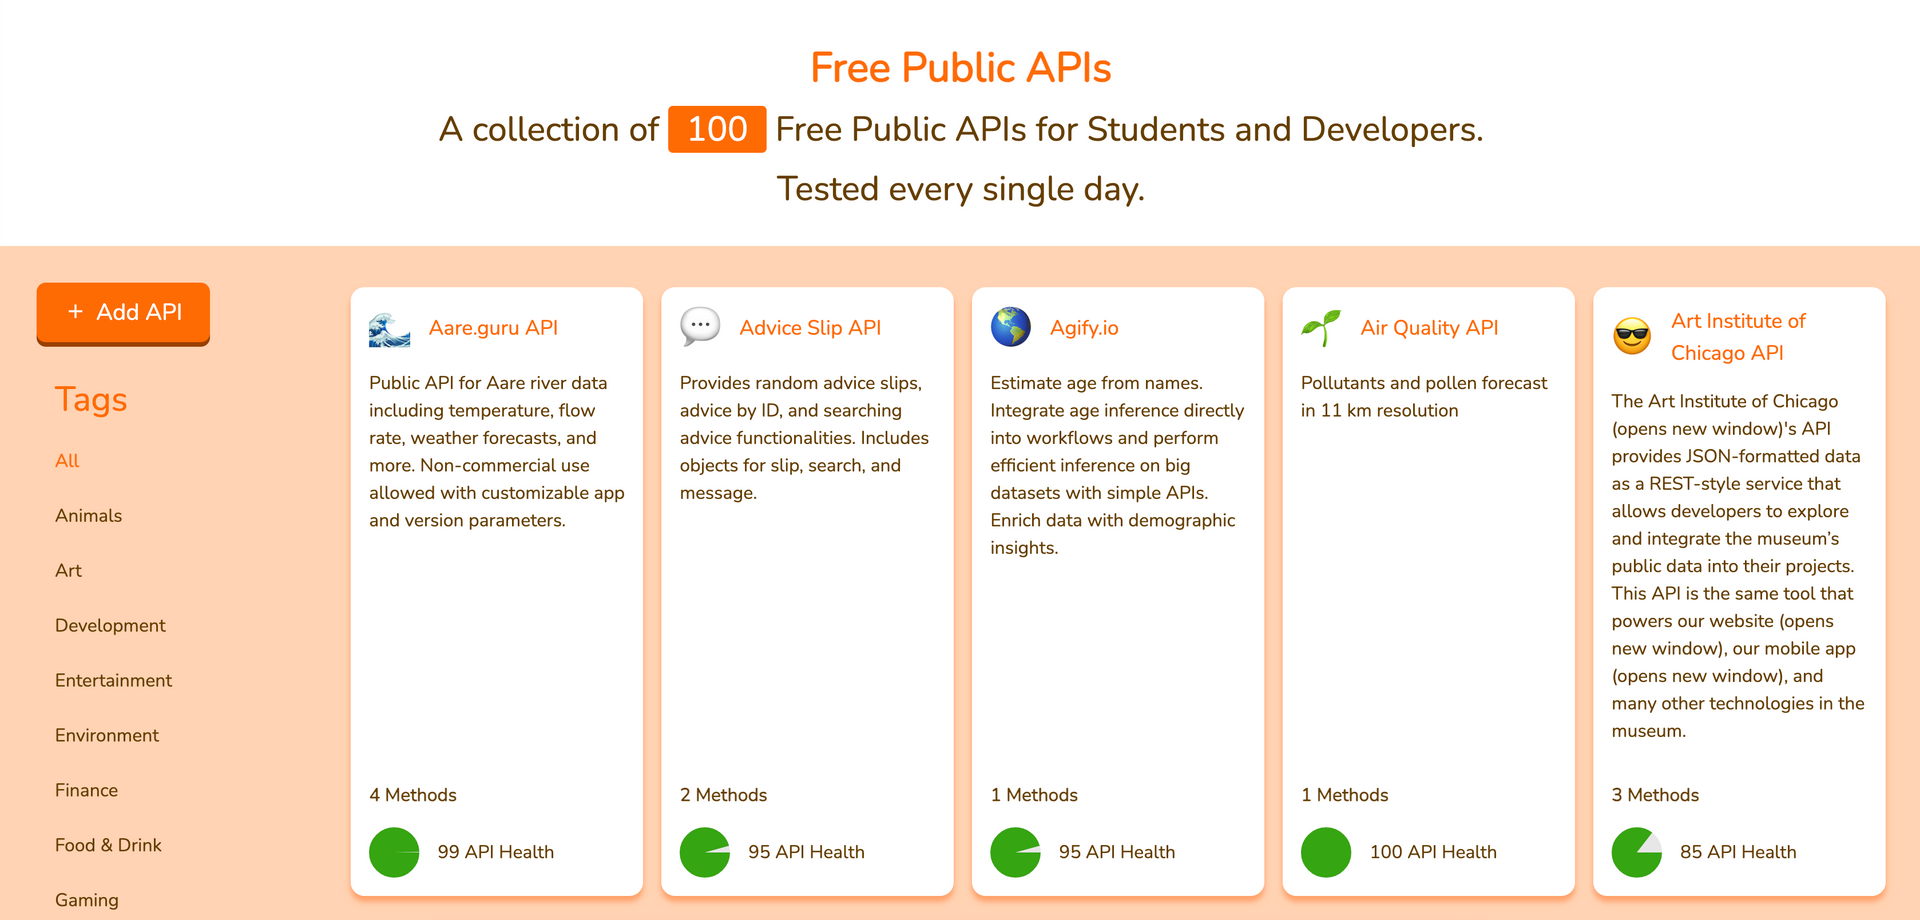 How to find Free Public APIs for Developers and Students